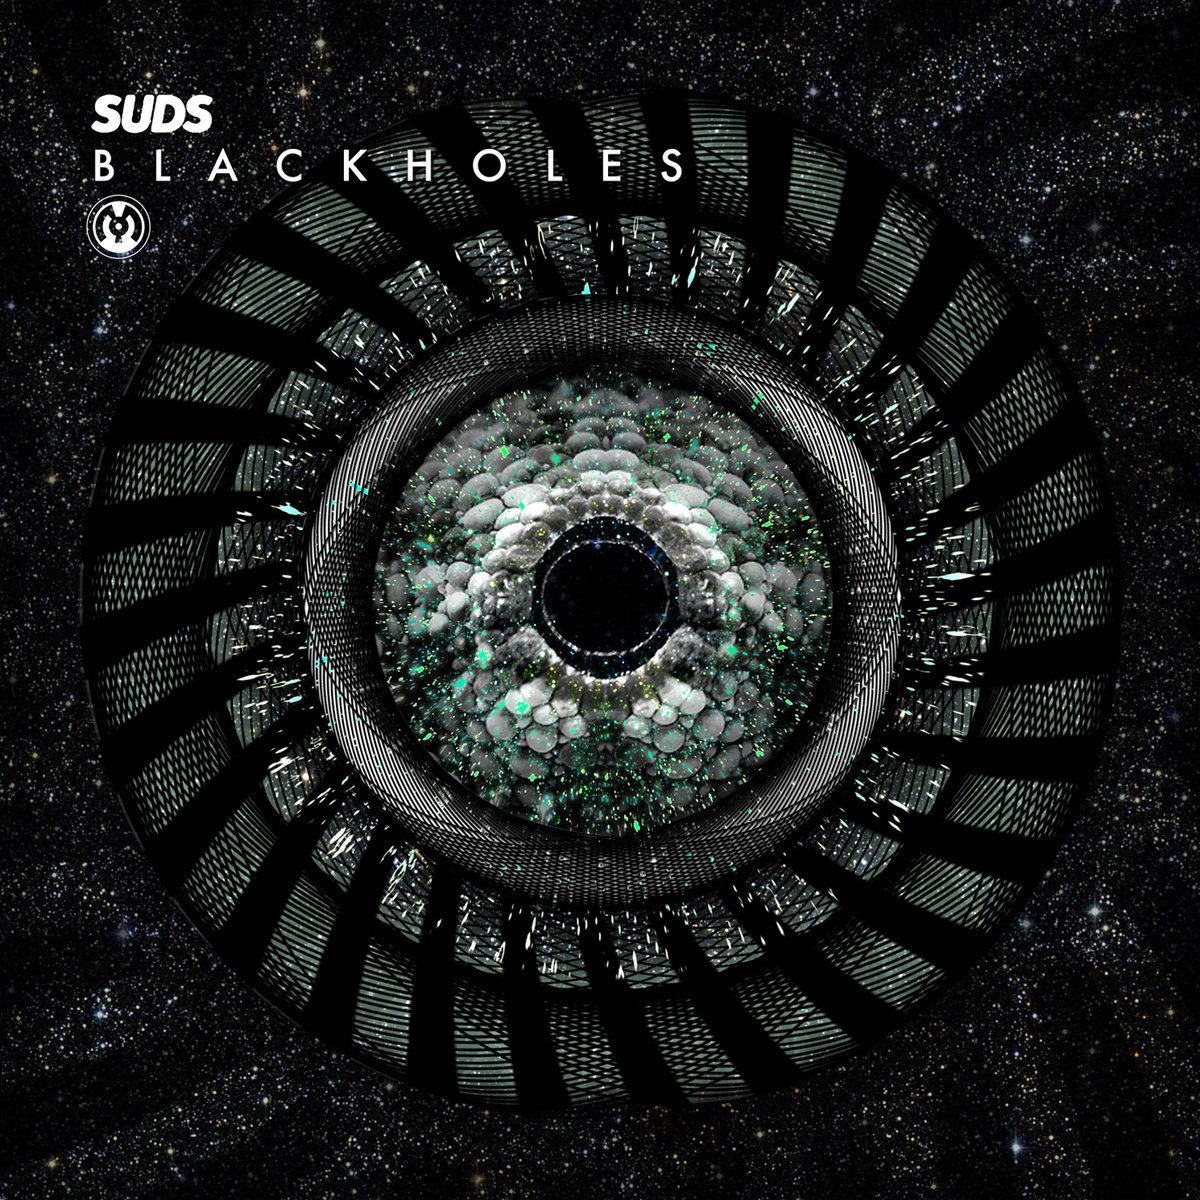 SuDs - The Most Annoying Sound in the World @ 'Blackholes' album (electronic, dubstep)